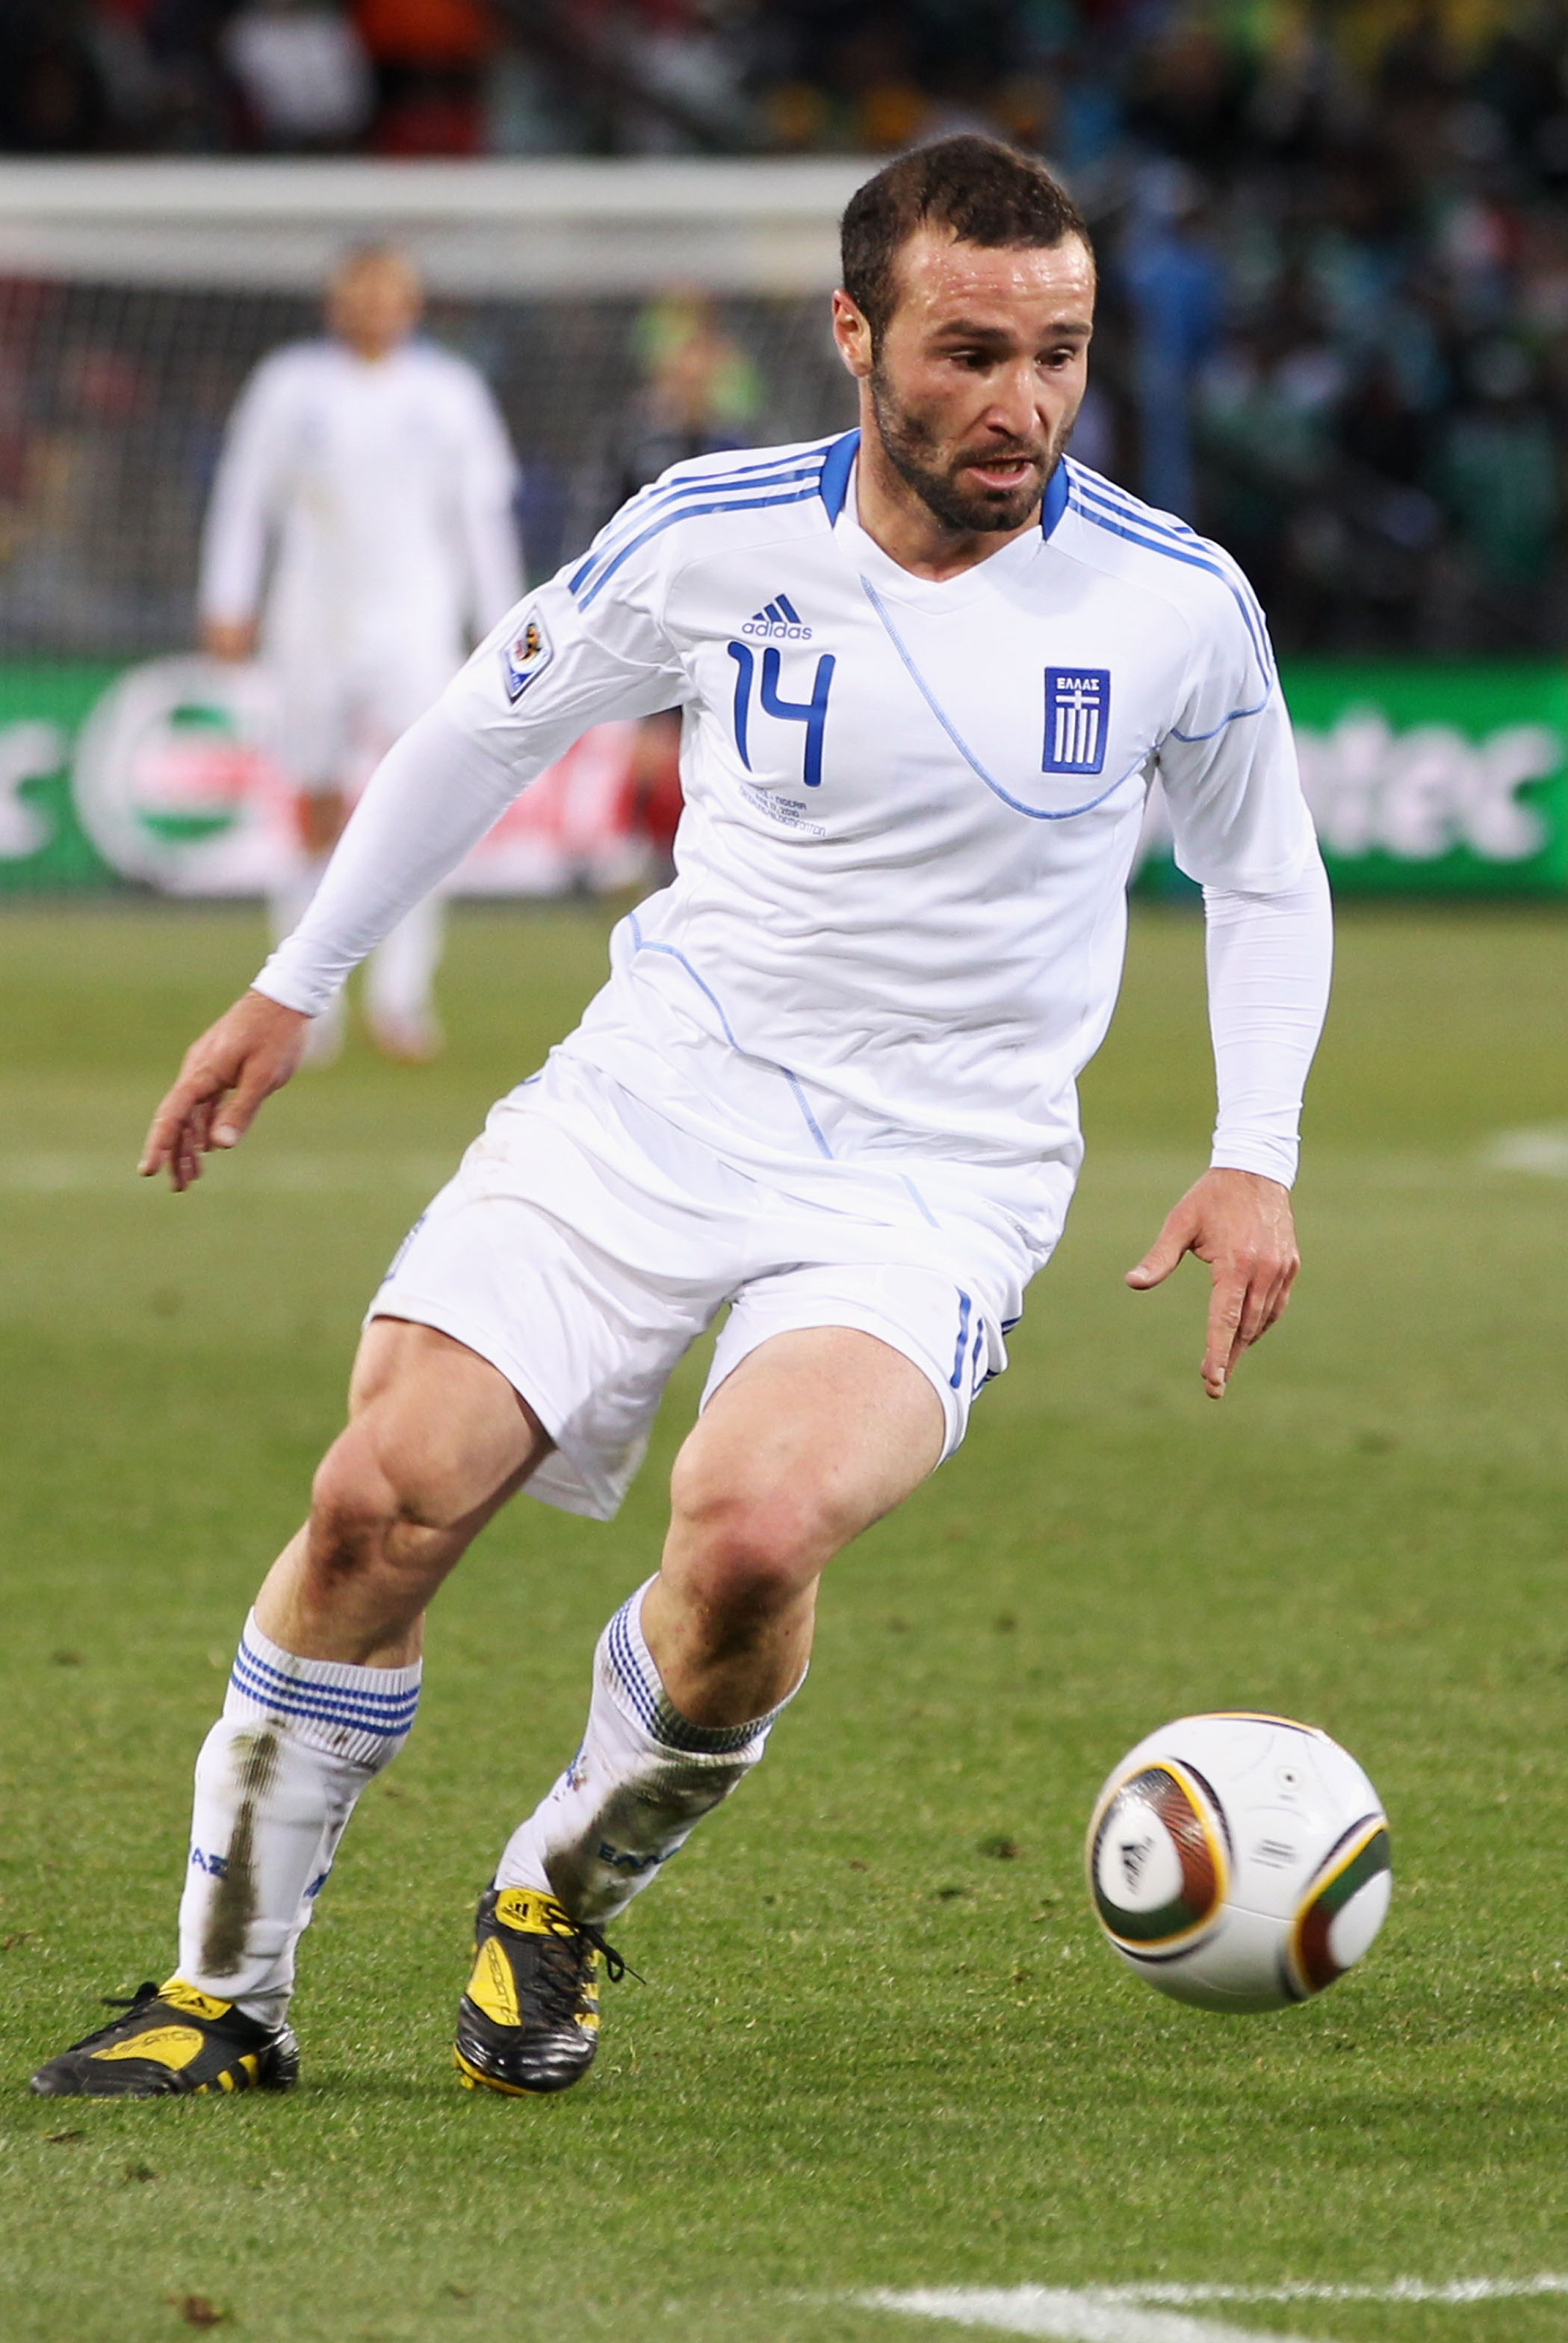 BLOEMFONTEIN, SOUTH AFRICA - JUNE 17:  Dimitrios Salpingidis of Greece in action during the 2010 FIFA World Cup South Africa Group B match between Greece and Nigeria at the Free State Stadium on June 17, 2010 in Mangaung/Bloemfontein, South Africa.  (Phot